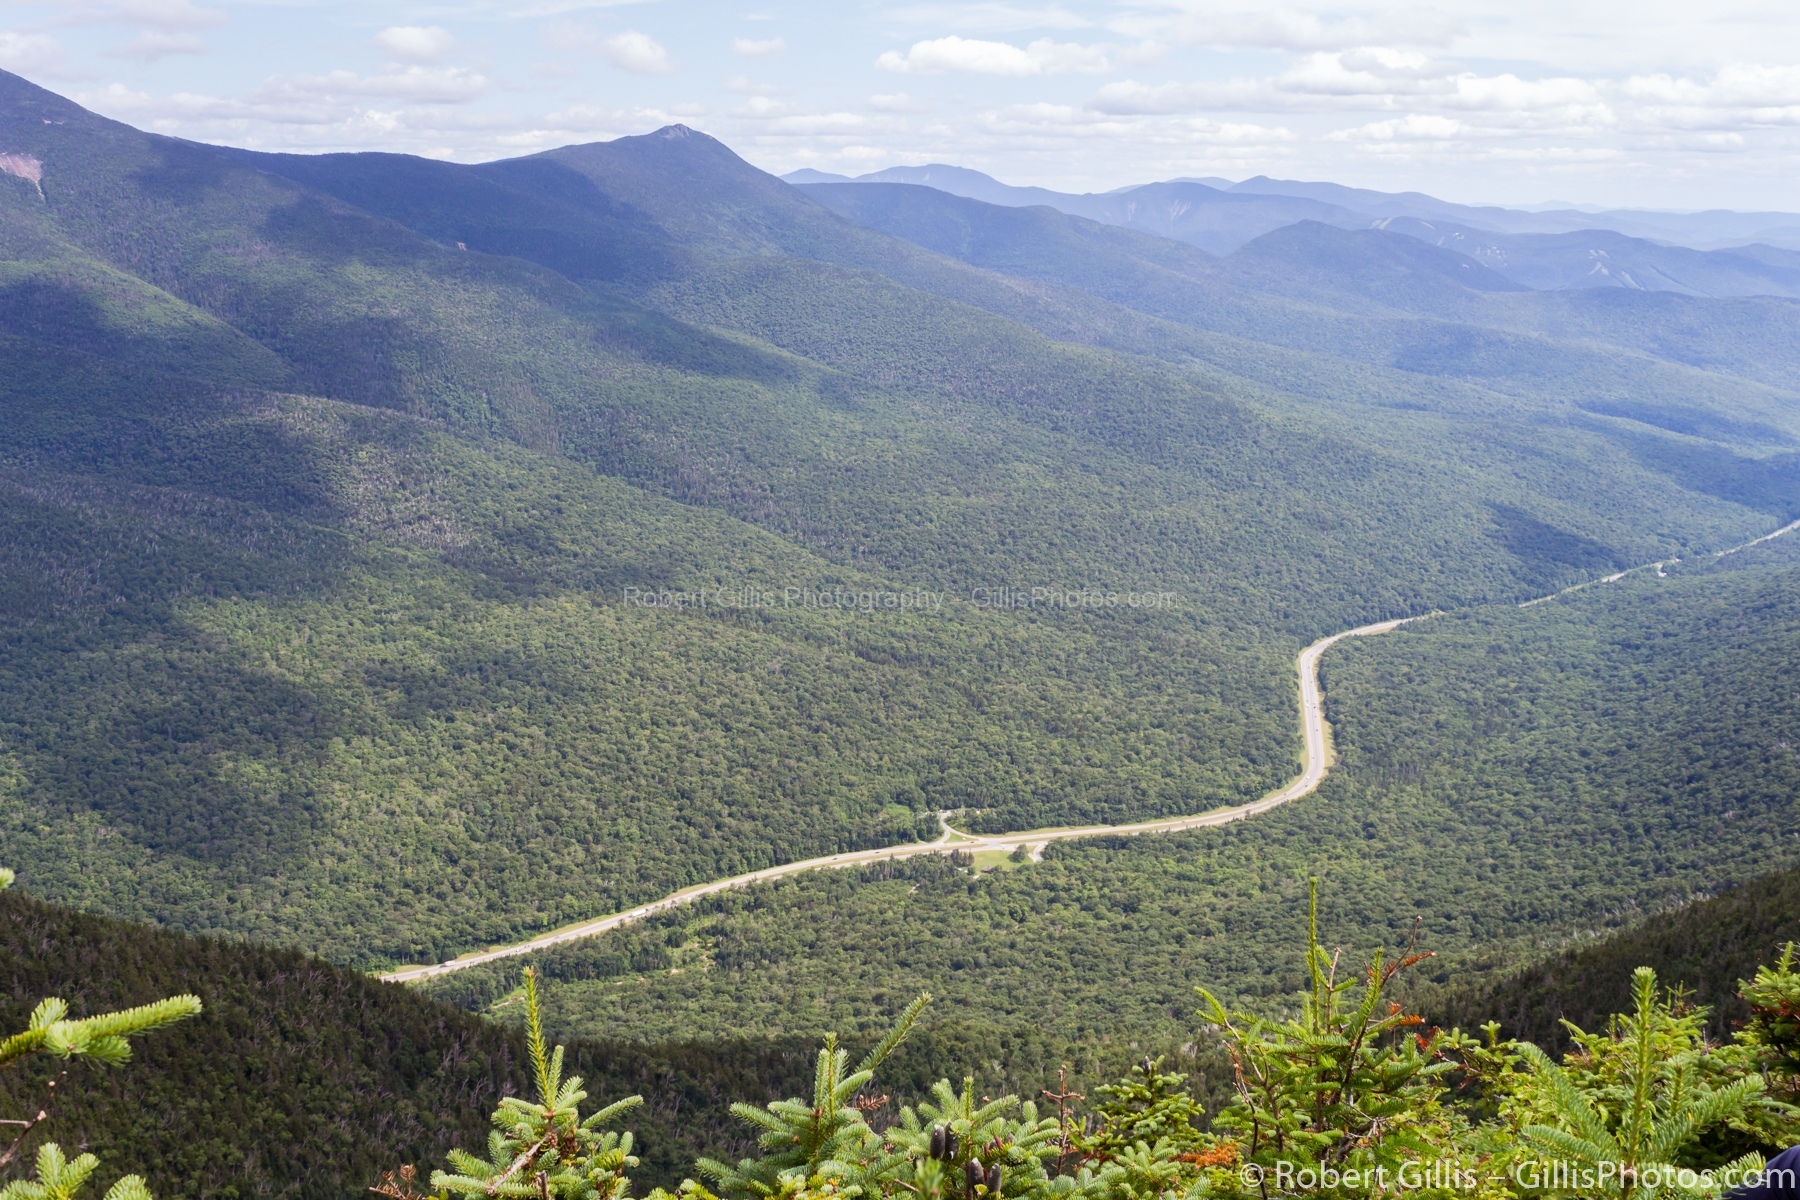 20-Franconia-Cannon-Mountain-Summit-Franconia-Notch-Route-93-Highway